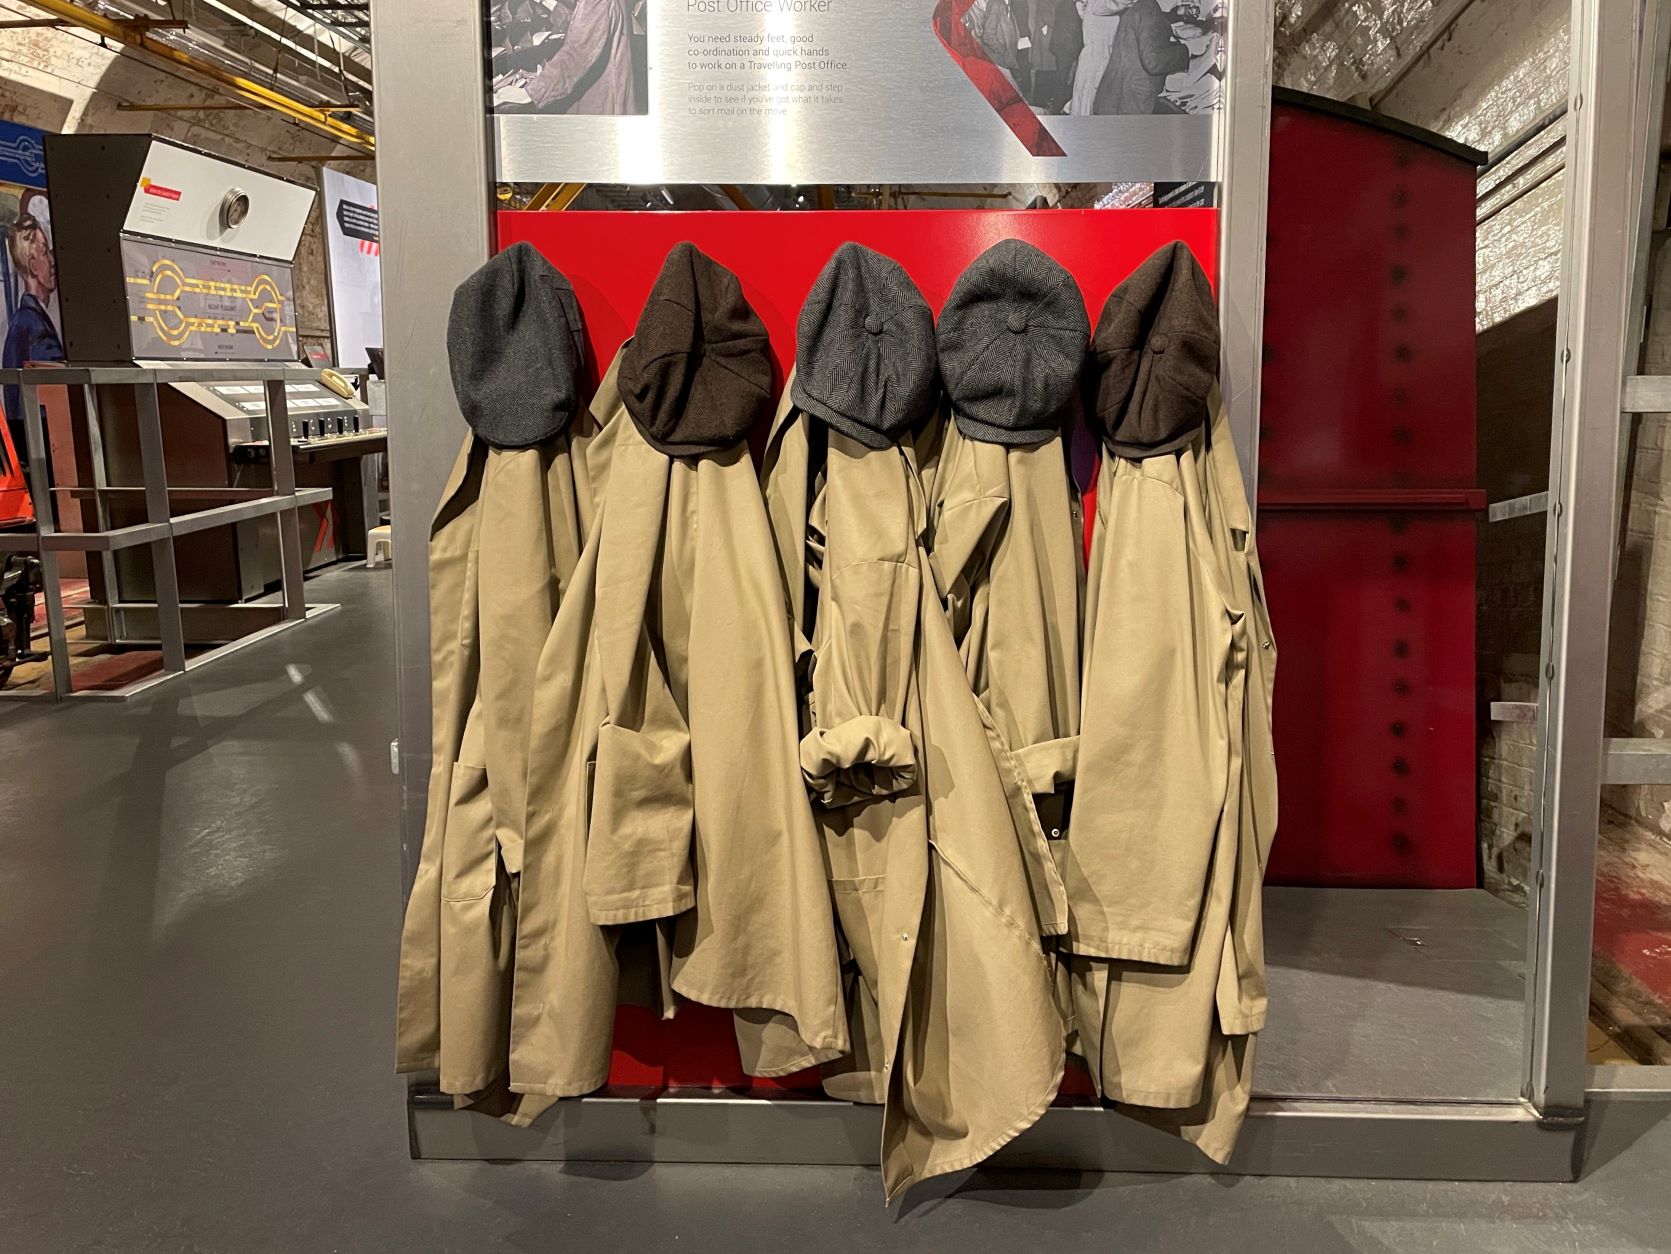 Image of the old postal workers brown jackets and caps hanging up in a row.